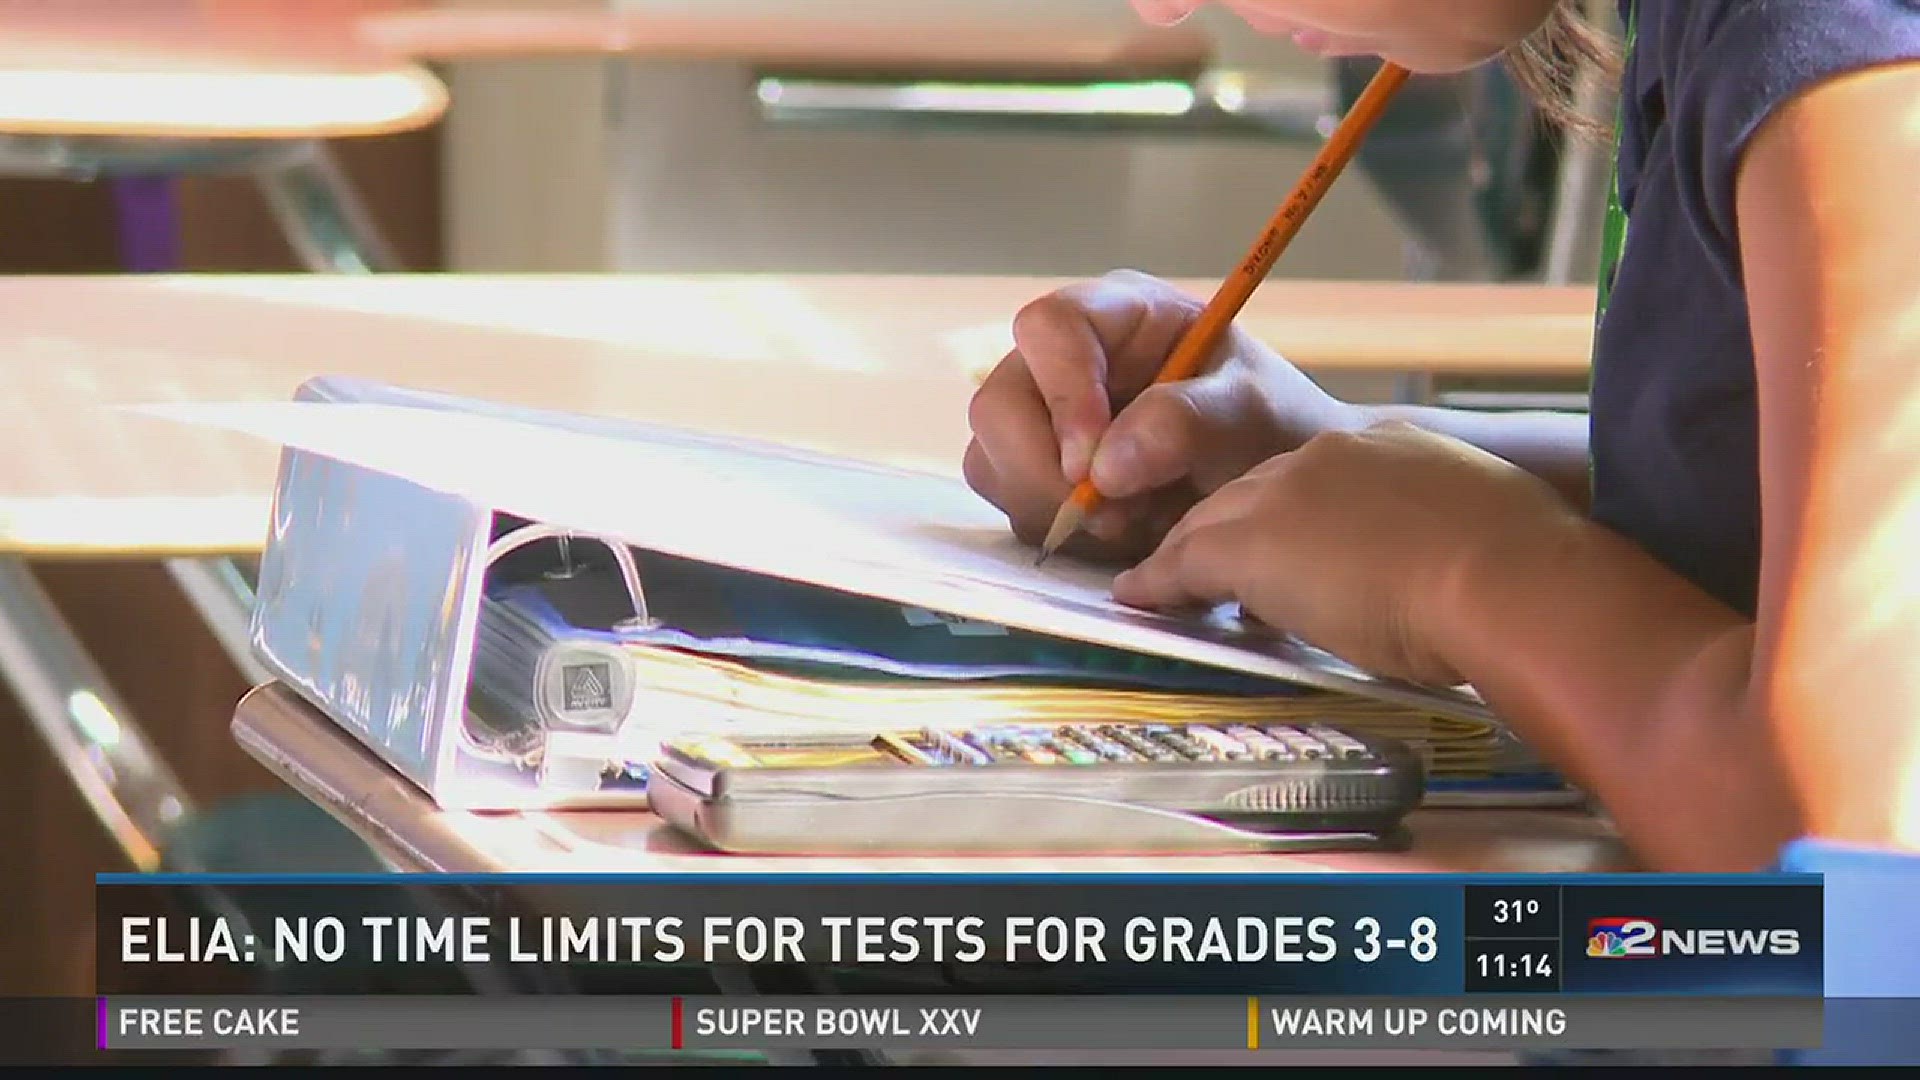 Elia: No Time Limits for Tests for Grades 3-8